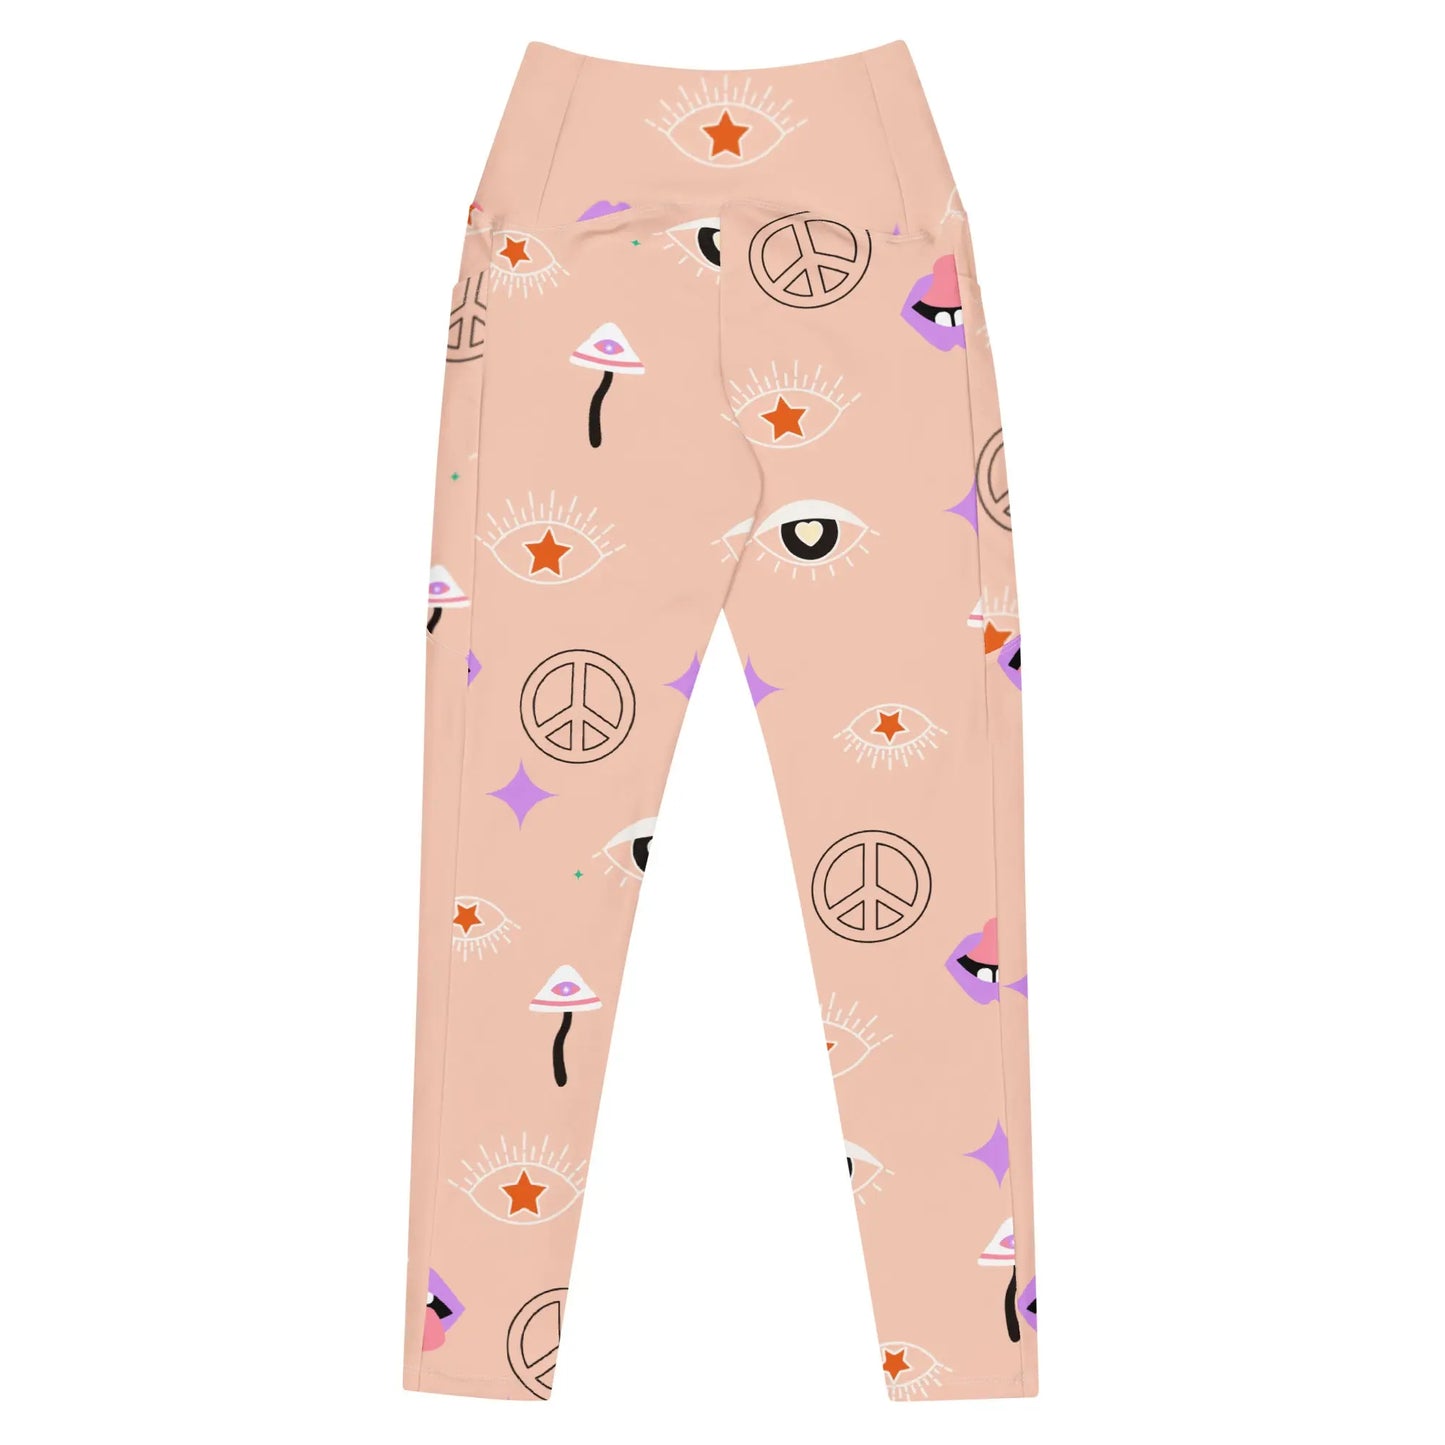 Karma 27" Recycled Leggings with Pockets Ellie Day Activewear